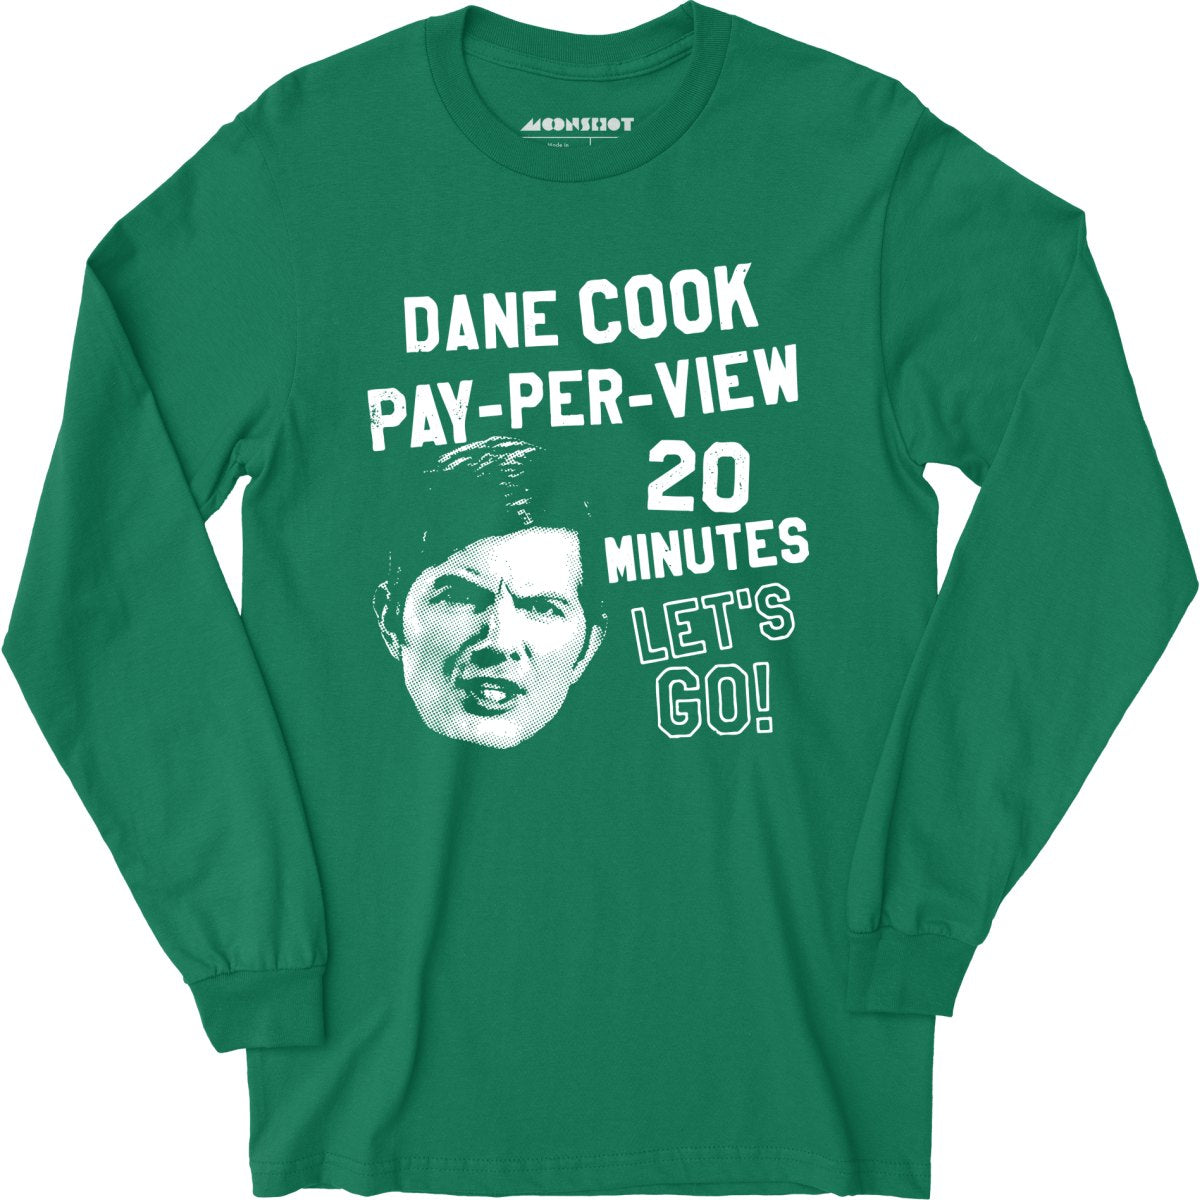 Dane Cook Pay-Per-View 20 Minutes Let's Go - Long Sleeve T-Shirt